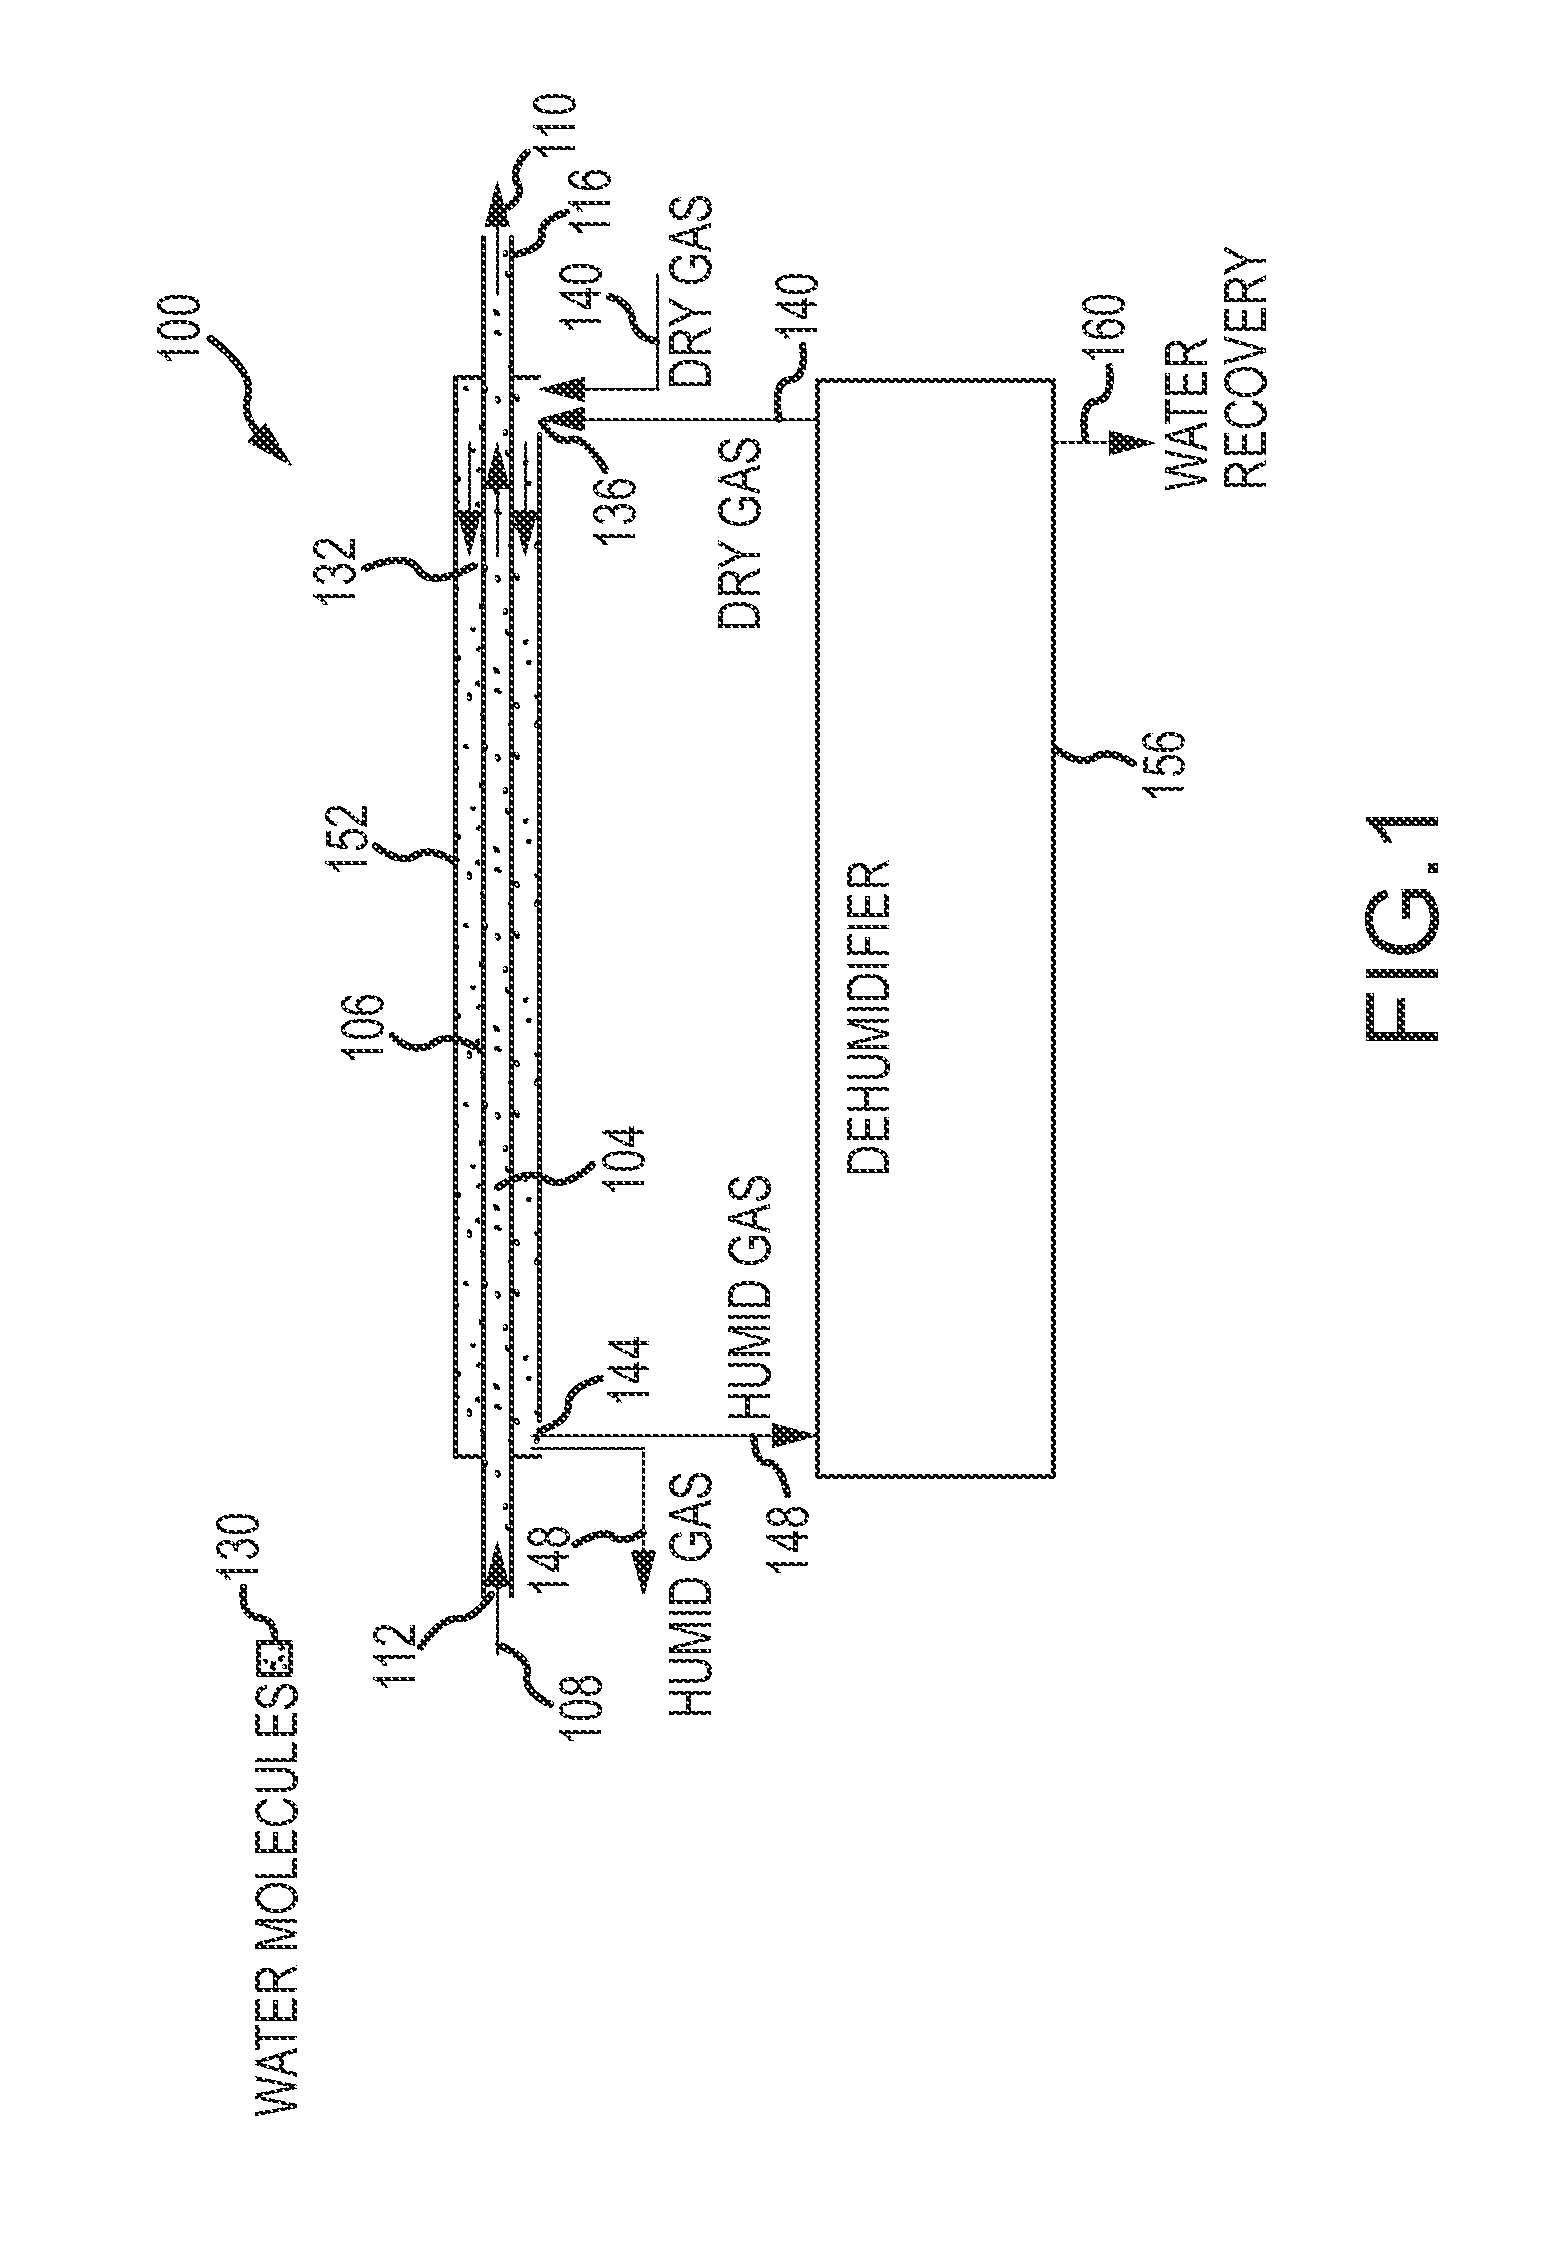 Dryer and water recovery/purification unit employing graphene oxide or perforated graphene monolayer membranes